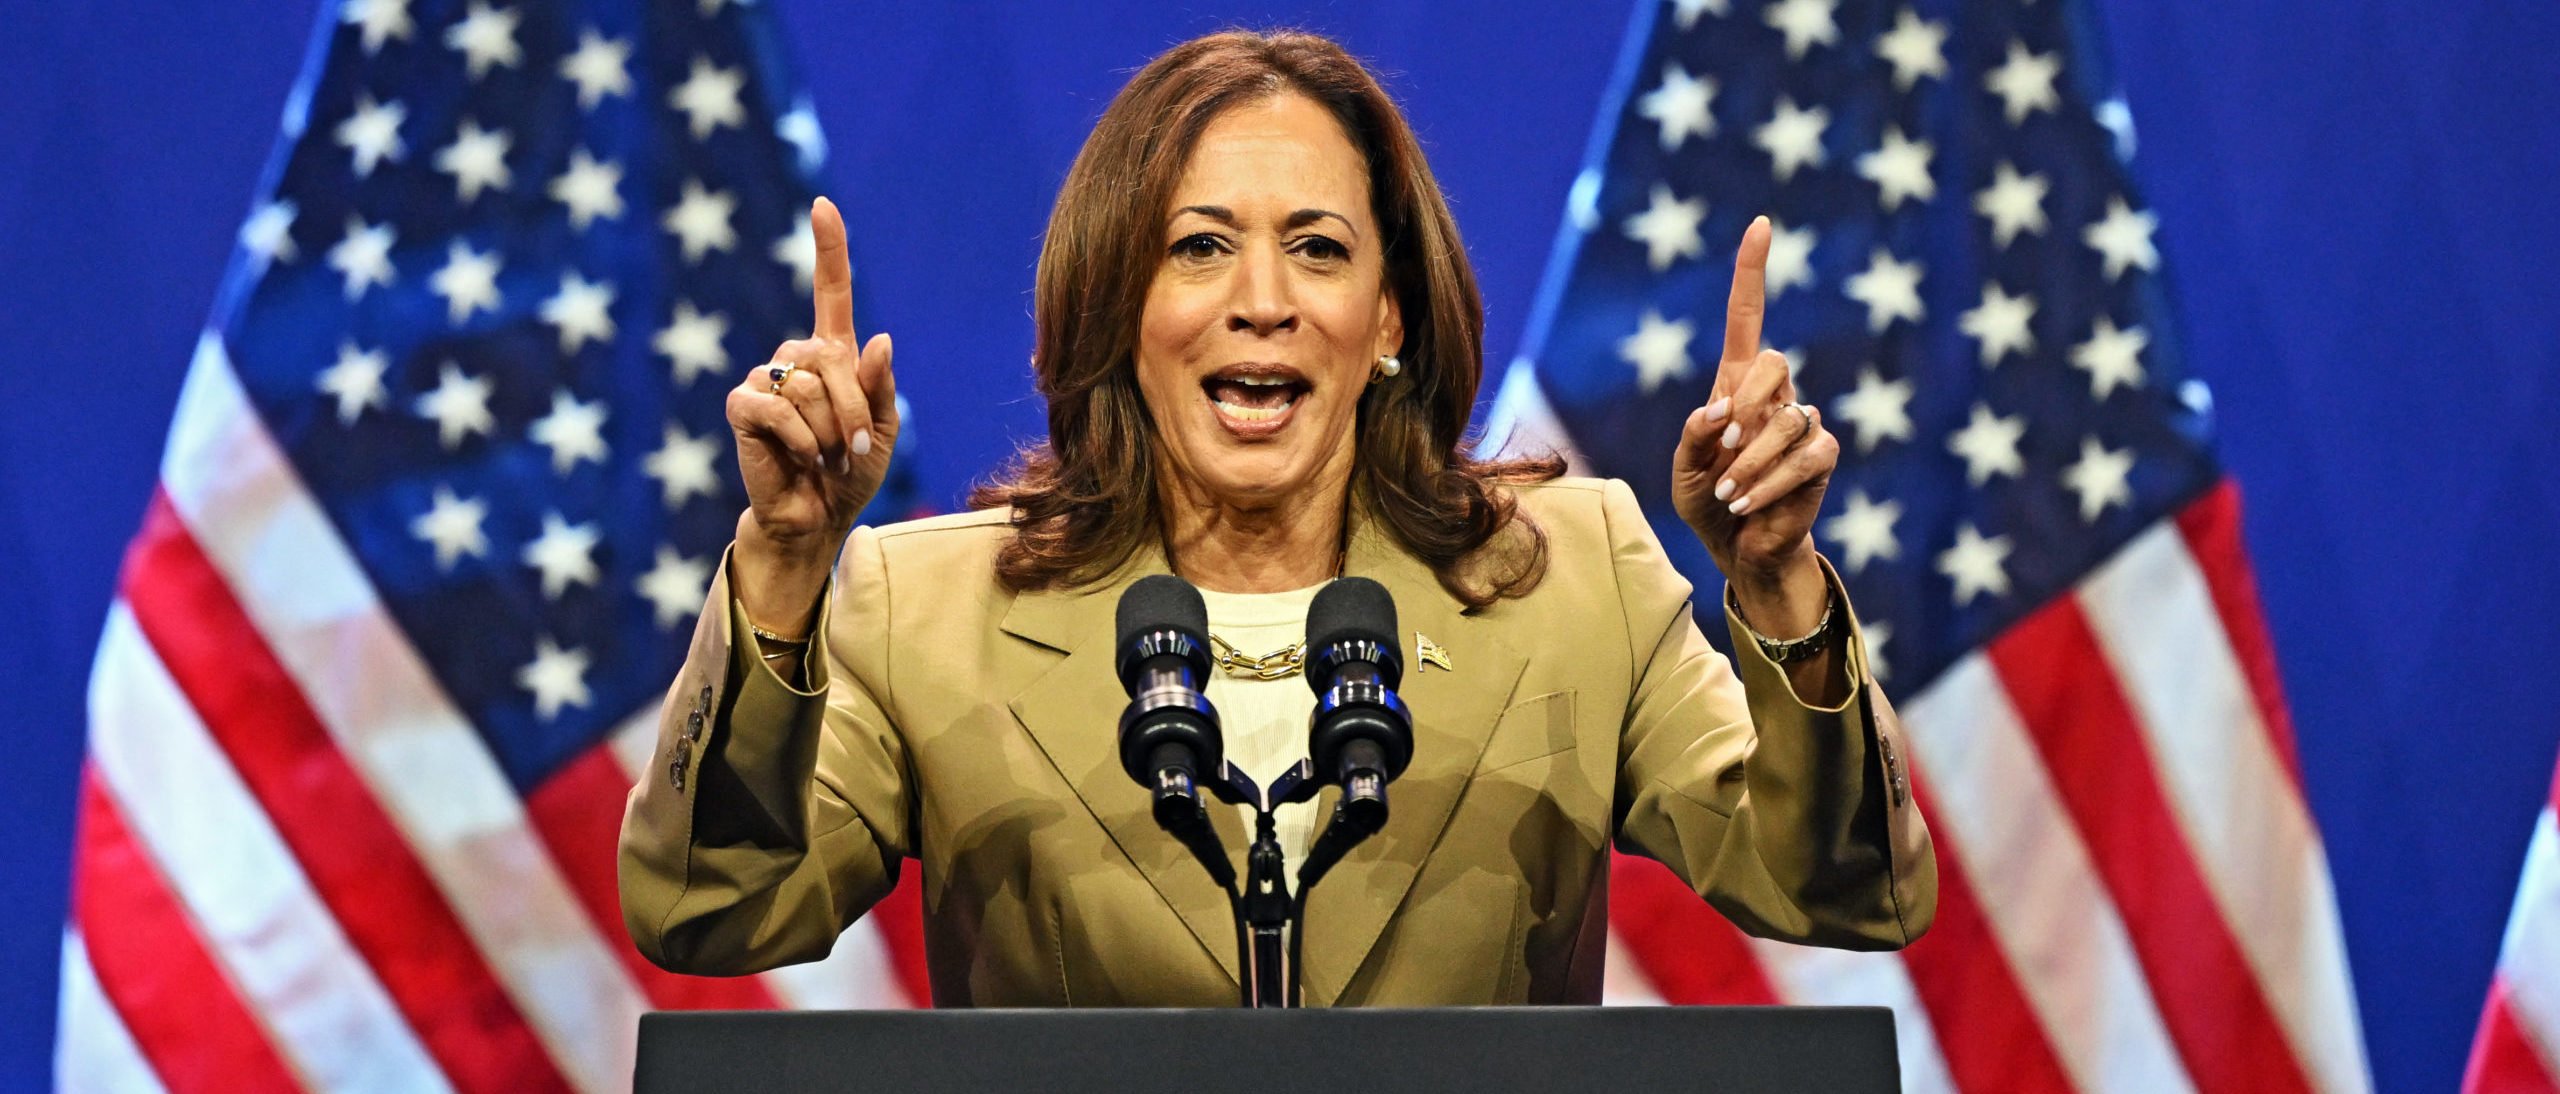 Vice President Kamala Harris speaks during a campaign event at the Asian and Pacific Islander American Vote Presidential Town Hall at the Pennsylvania Convention Center on July 13, 2024 in Philadelphia, Pennsylvania. (Photo by Drew Hallowell/Getty Images)